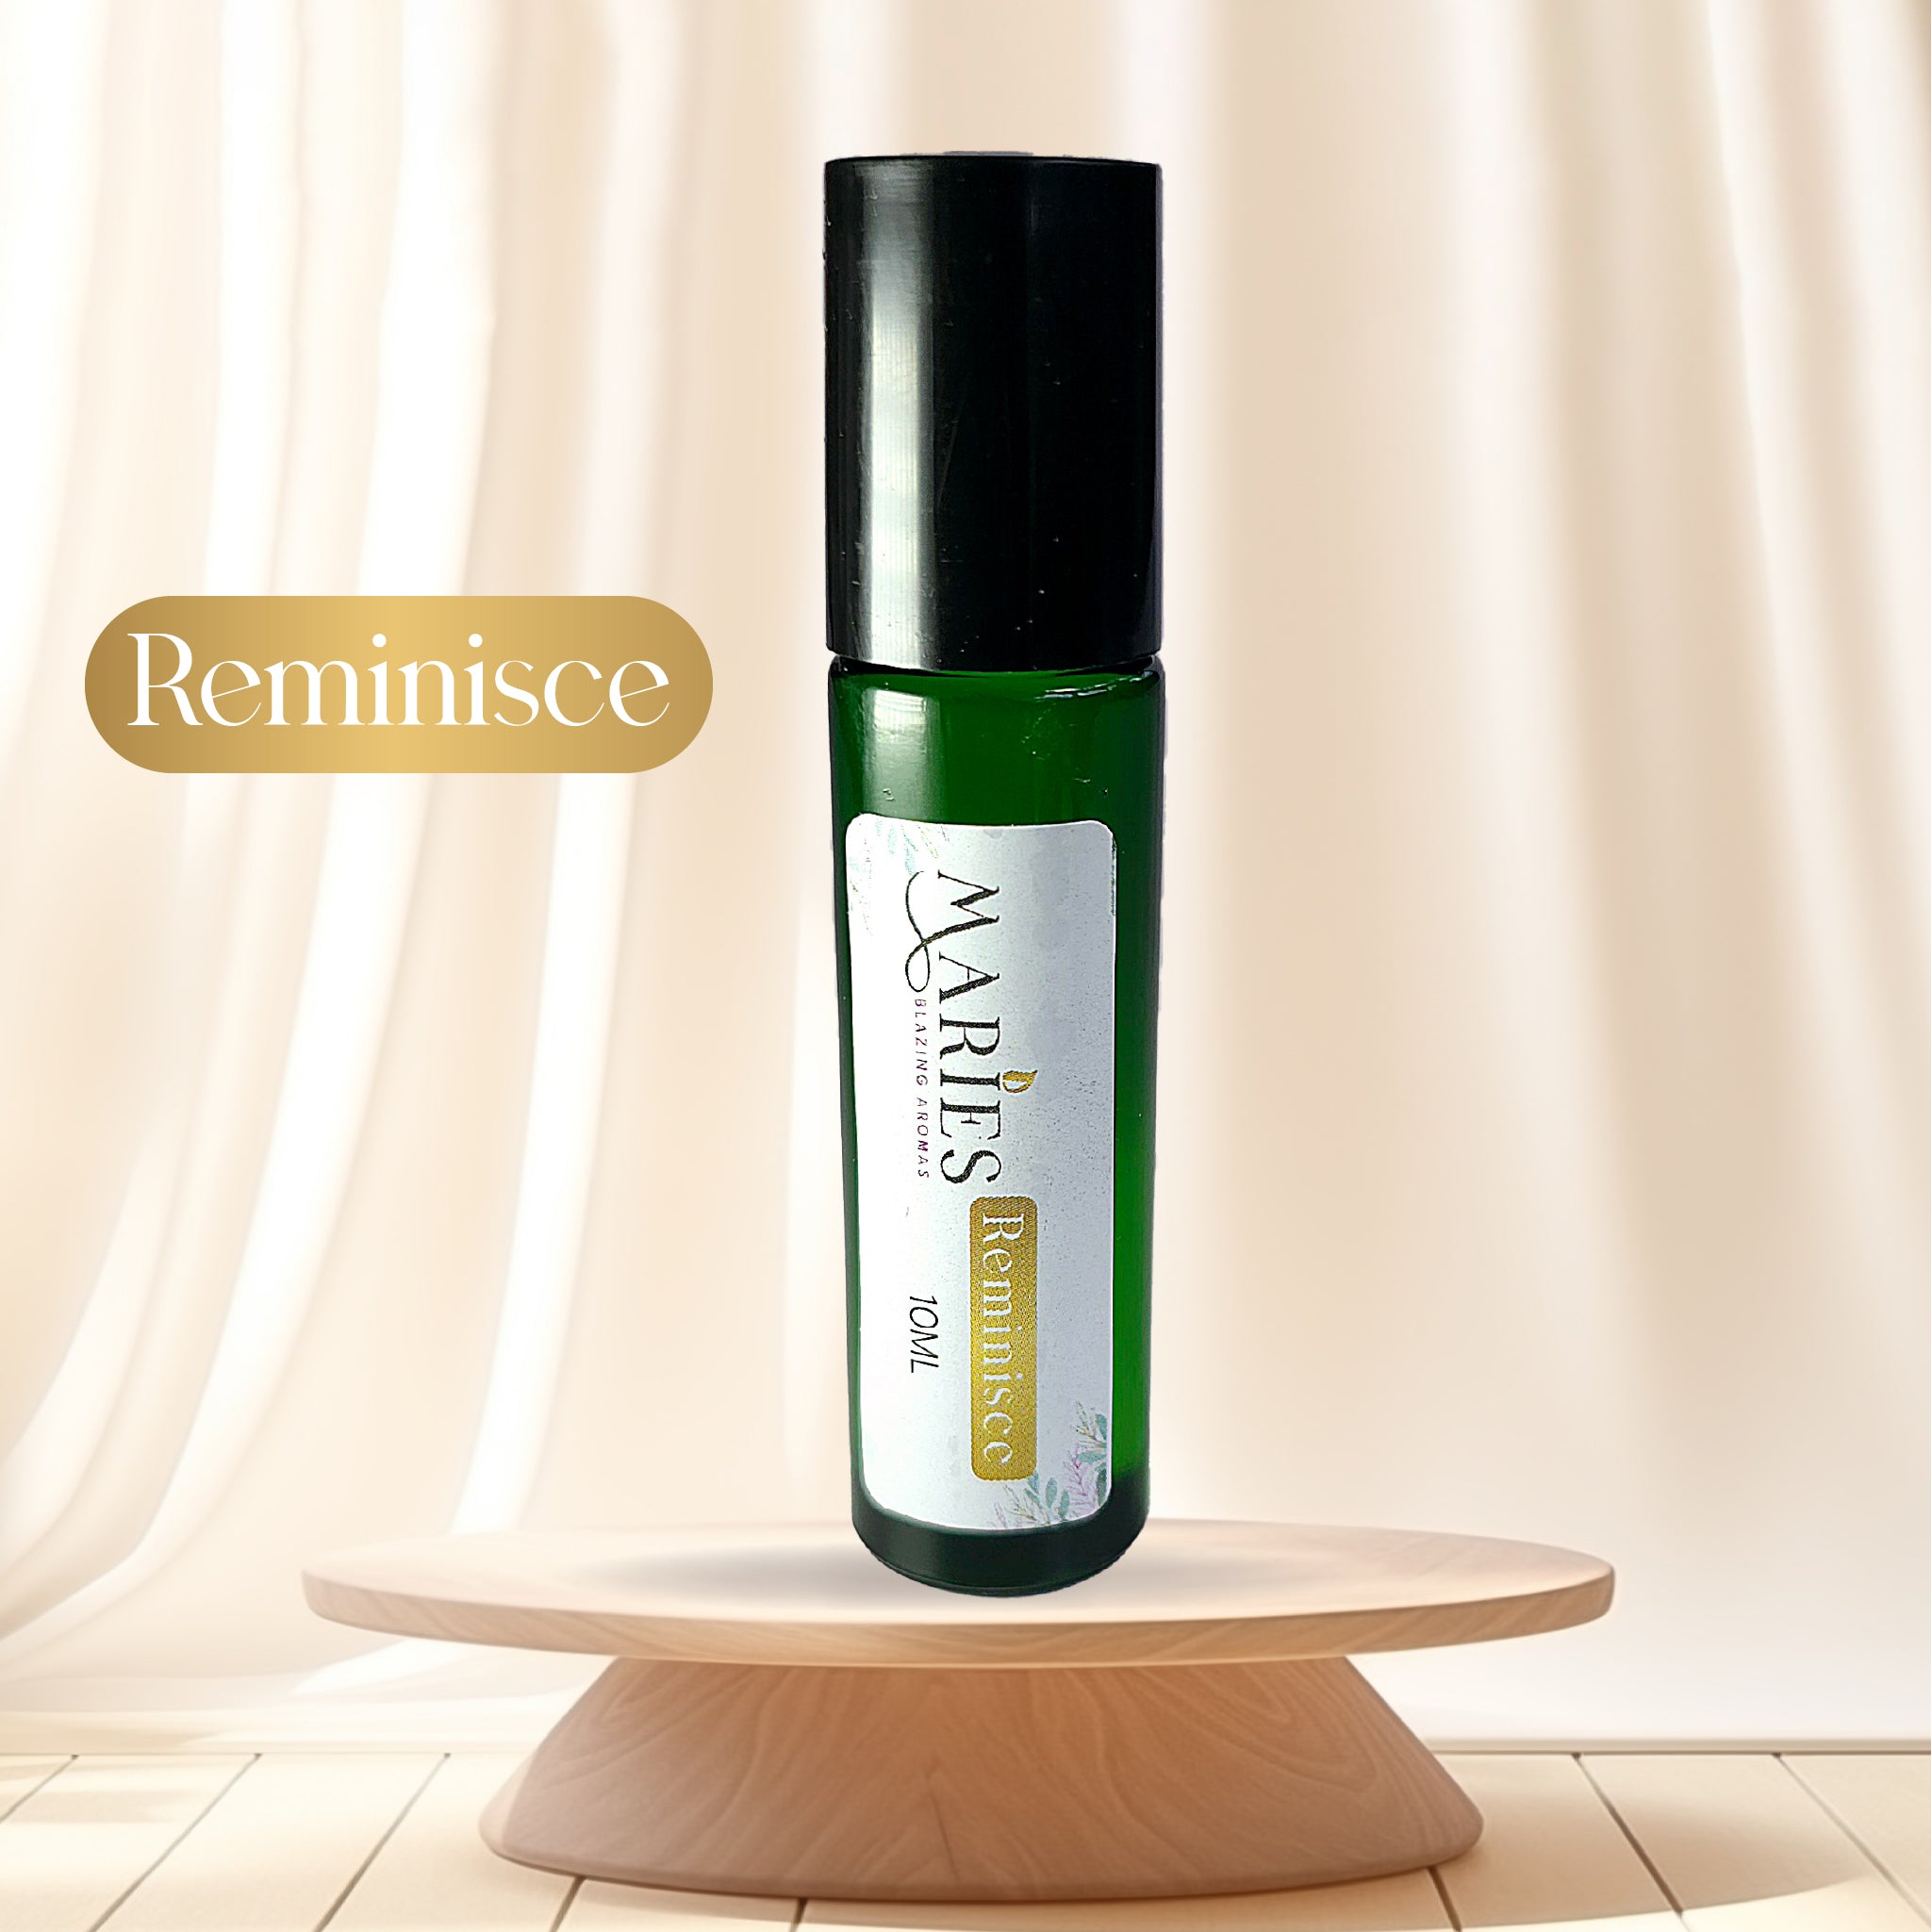 Premium Reminisce Perfume Roller Bottle by by Maries Blazing Aroma